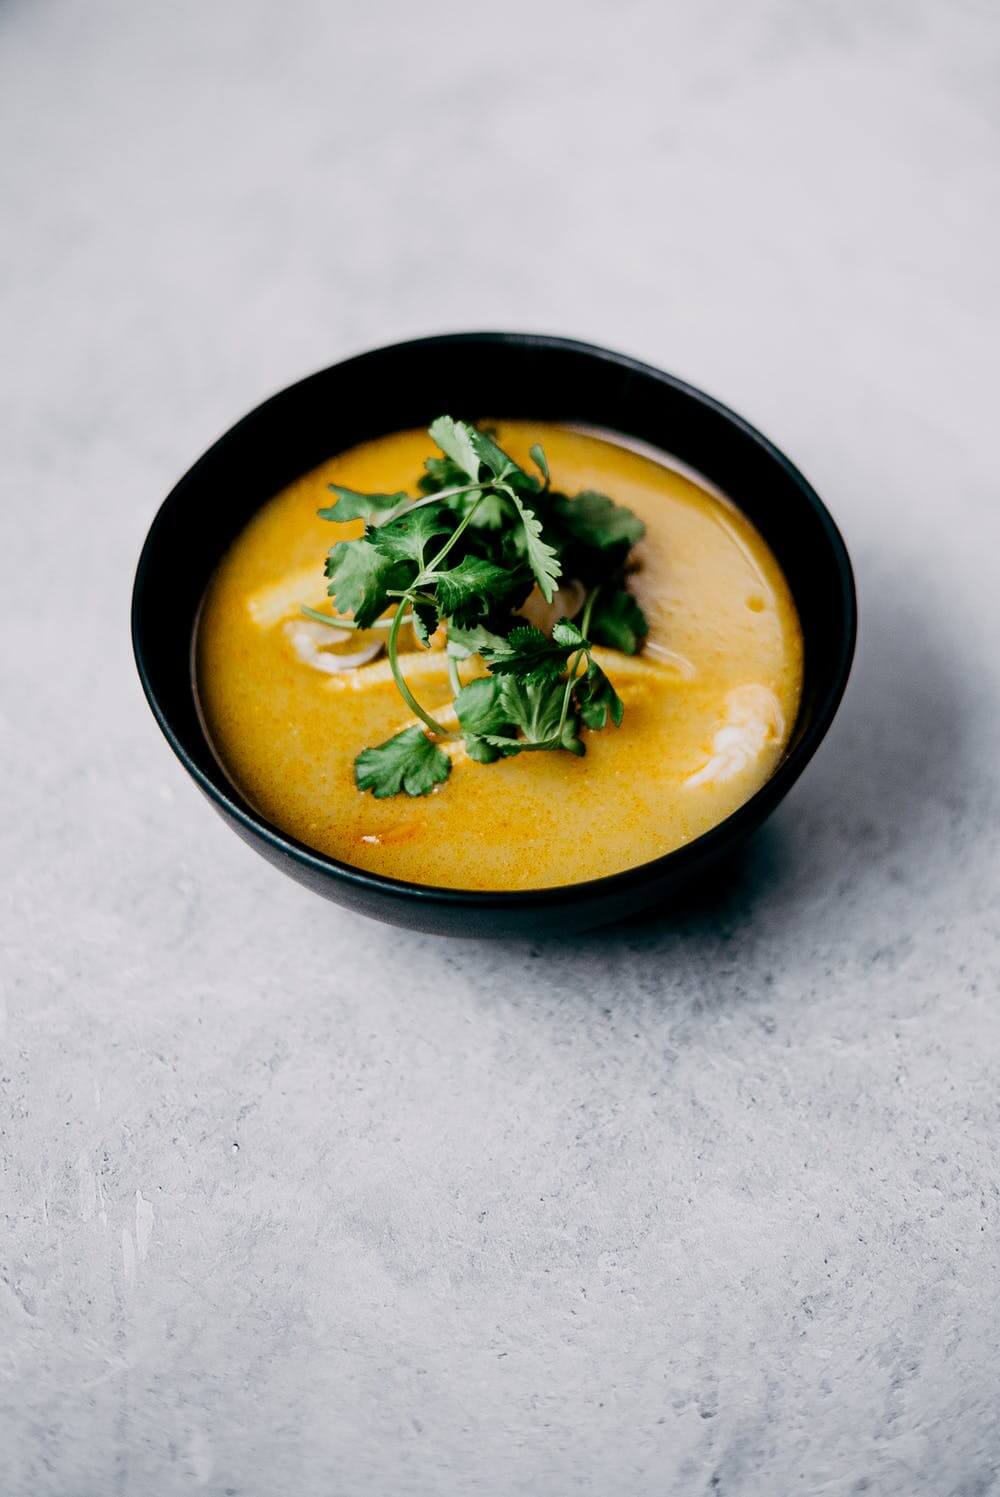 Orange soup in a bowl with parsley